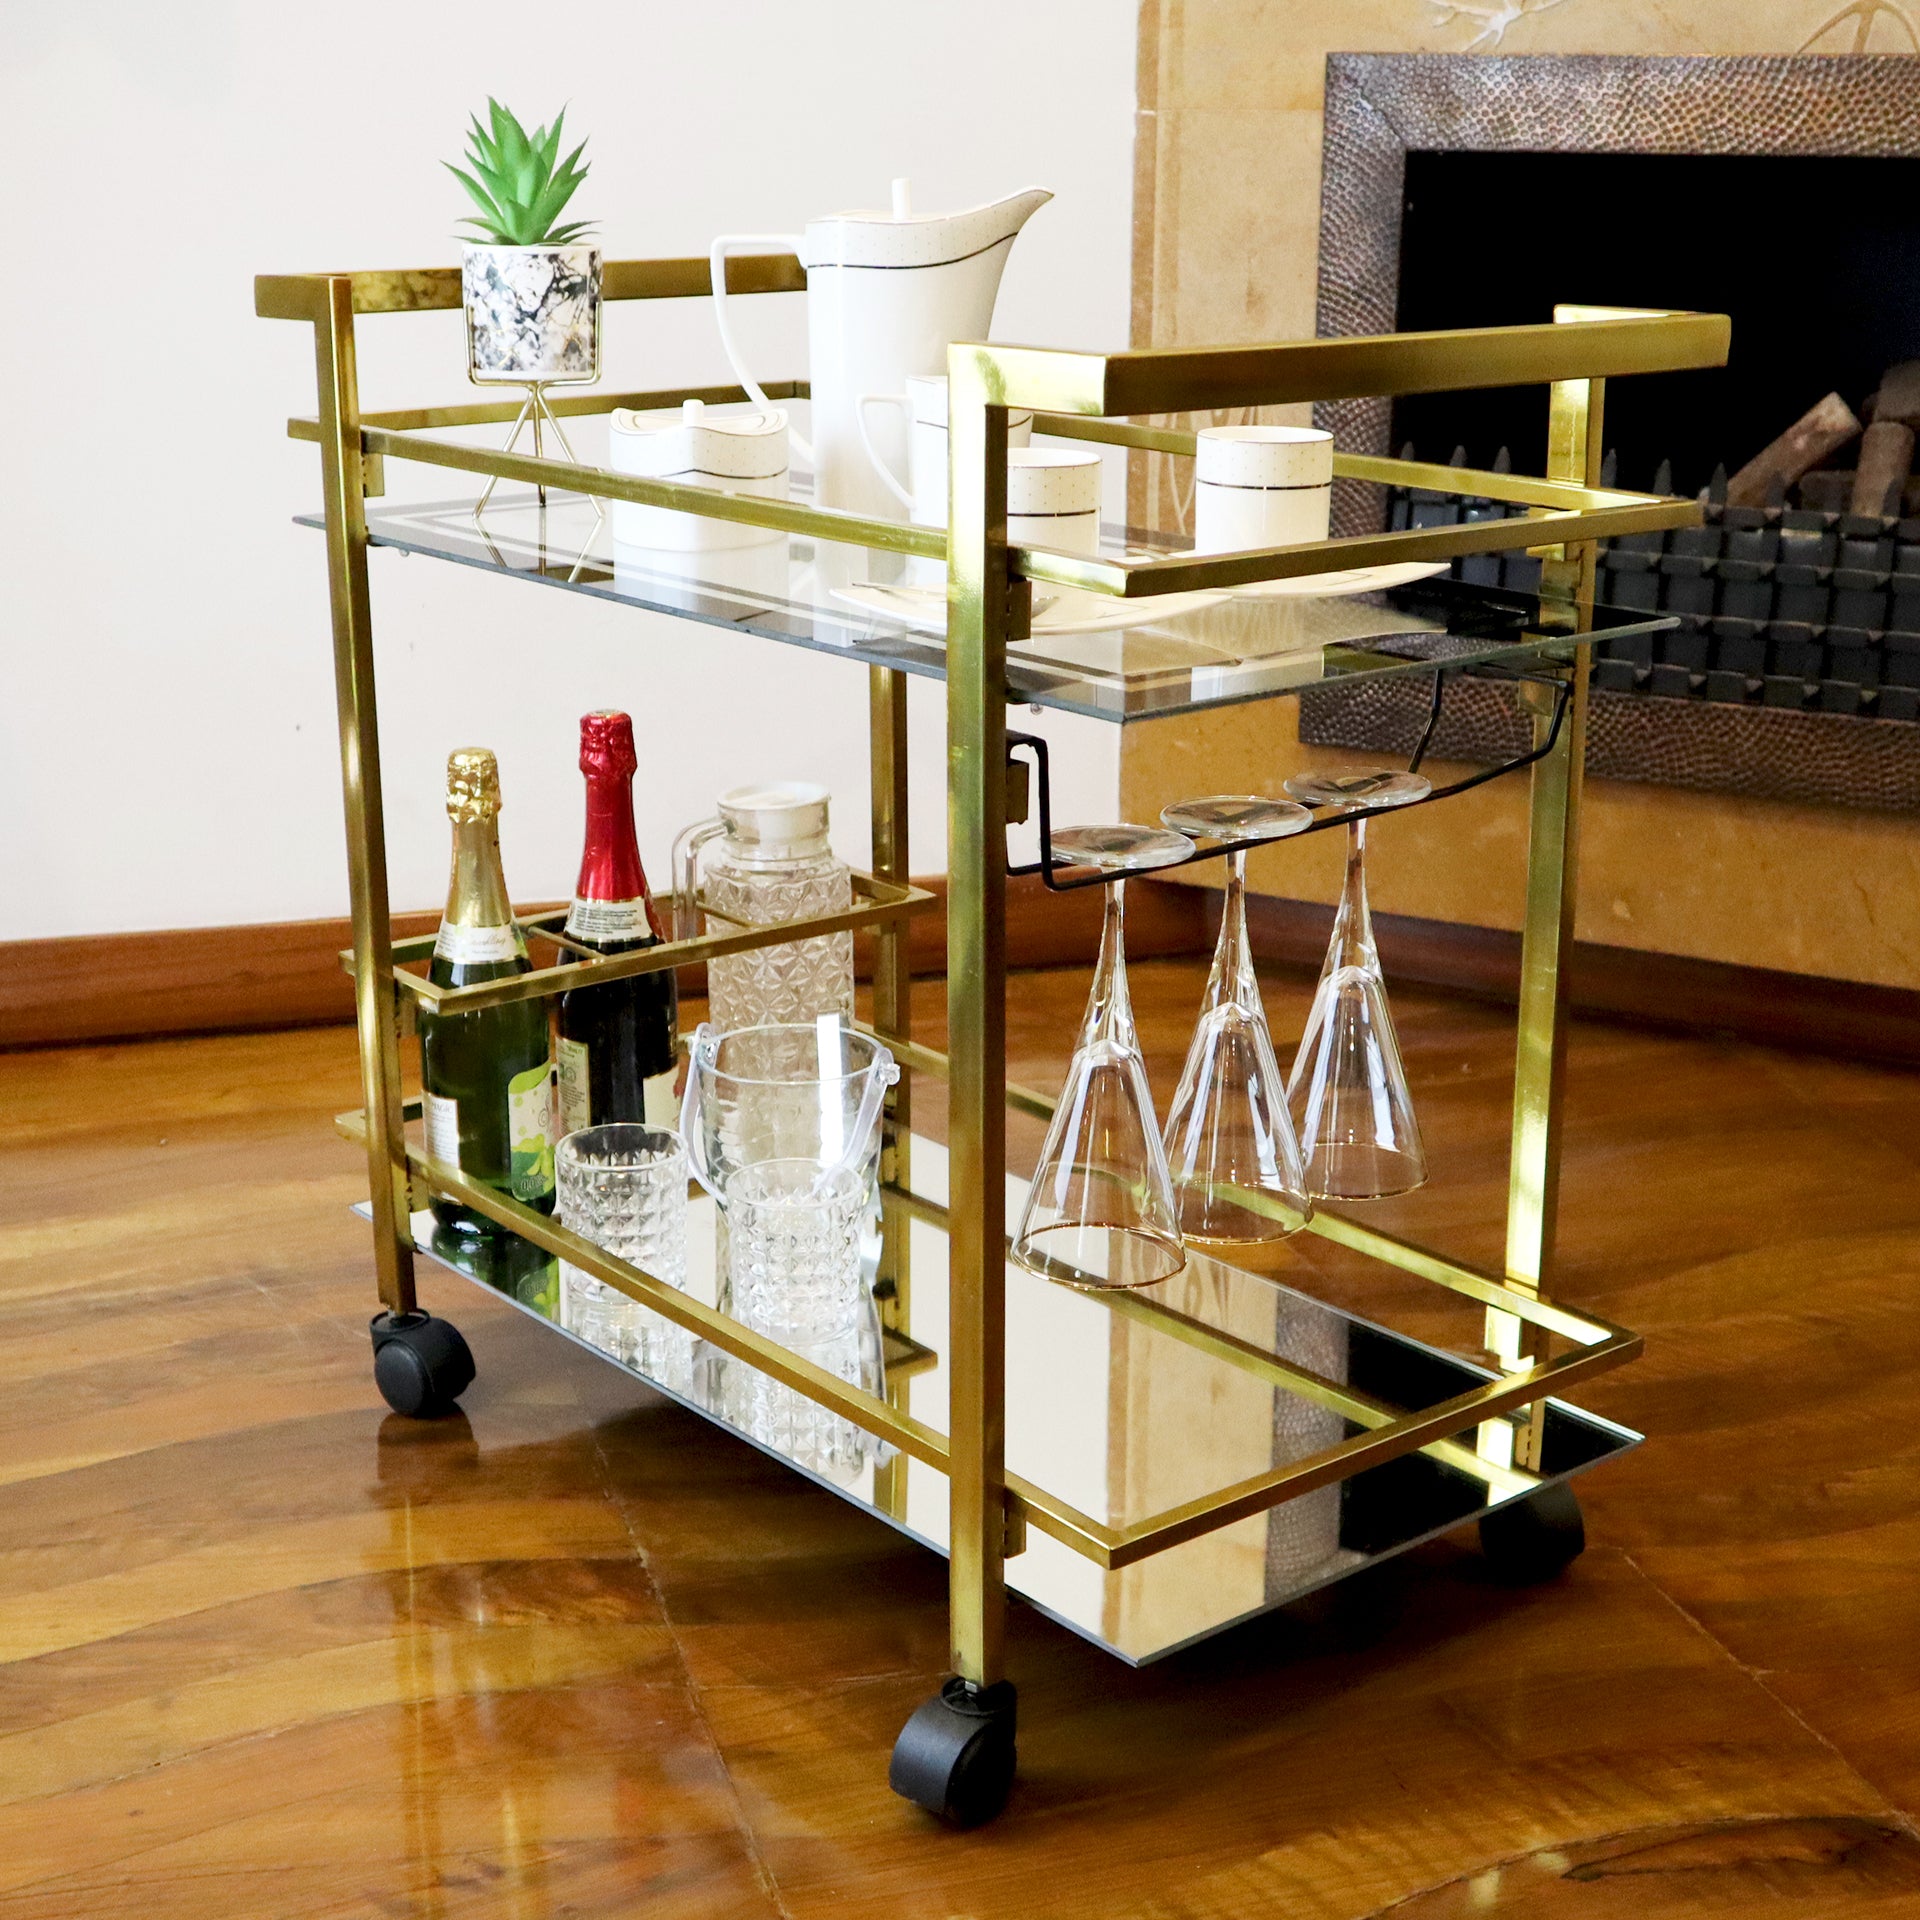 GLASGLOW Serving Trolley - serving cart size 30" x 16.5" x 28" Golden